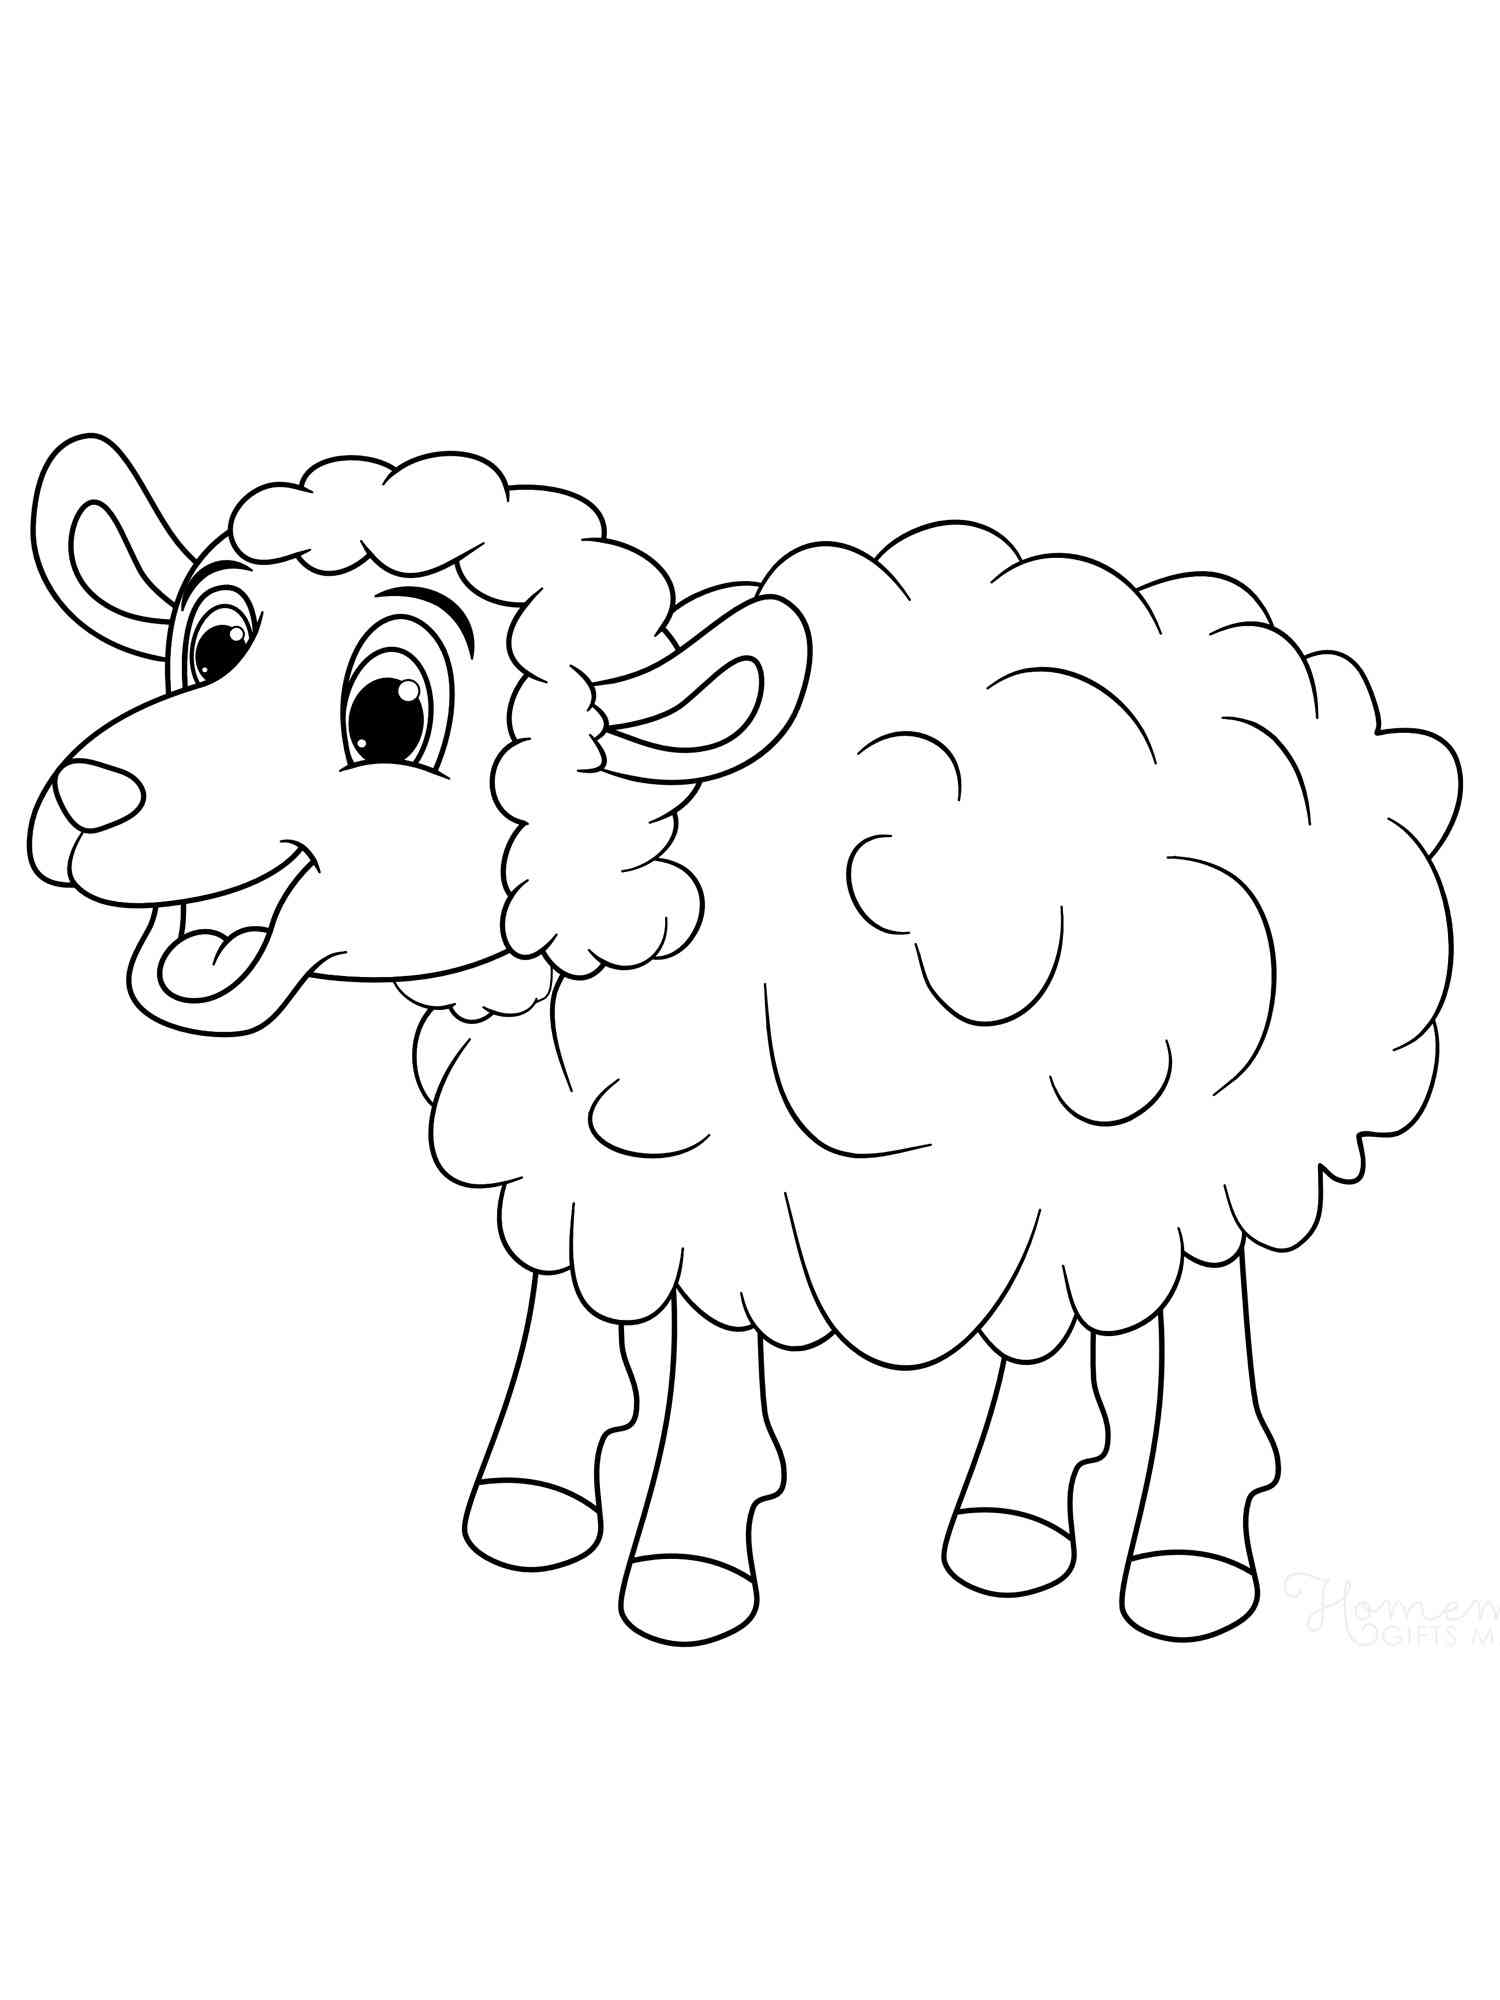 Happy Sheep coloring page